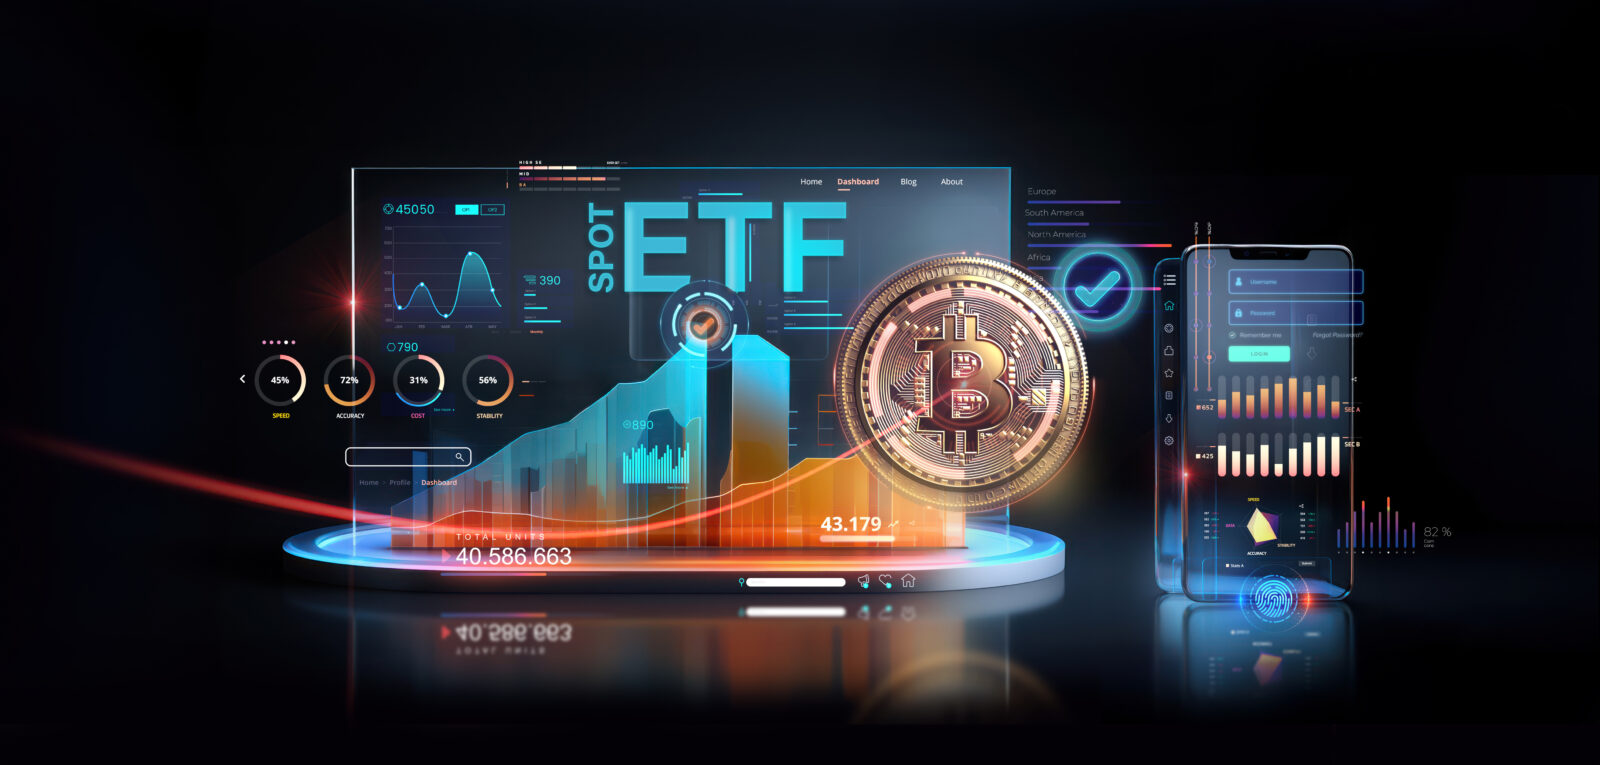 Crypto and bitcoin exchange traded fund or spot price EFT funds application gets approved and listed for institutions investment on stock exchanges concept as wide banner design with information data 2024/04/AdobeStock_641867510.jpeg 